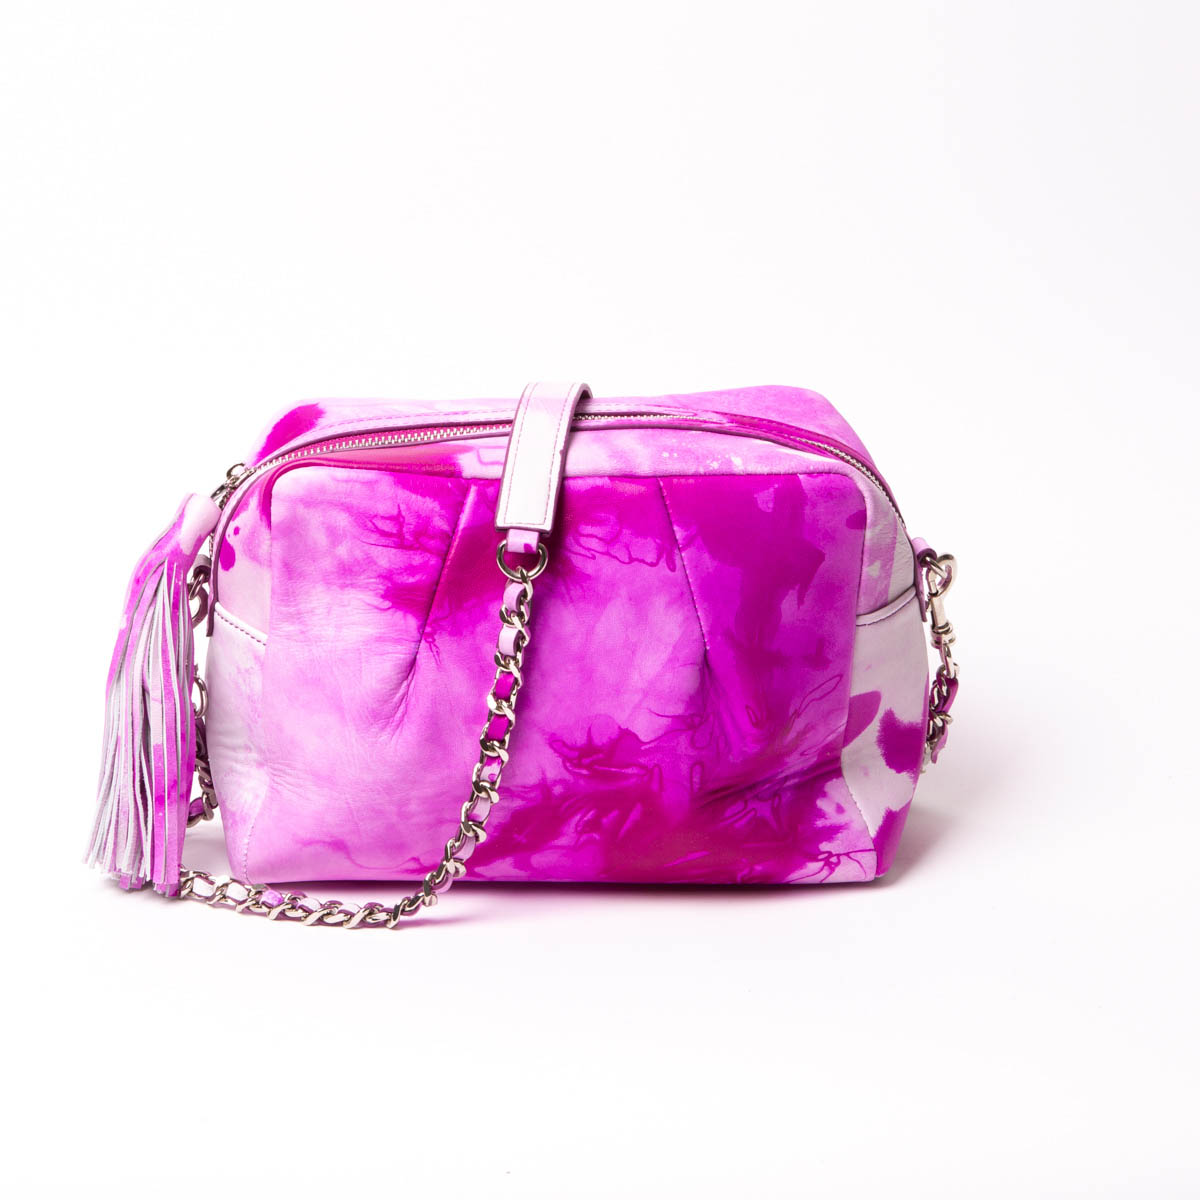 SAC LOULOU TIE AND DYE ORCHIDEE